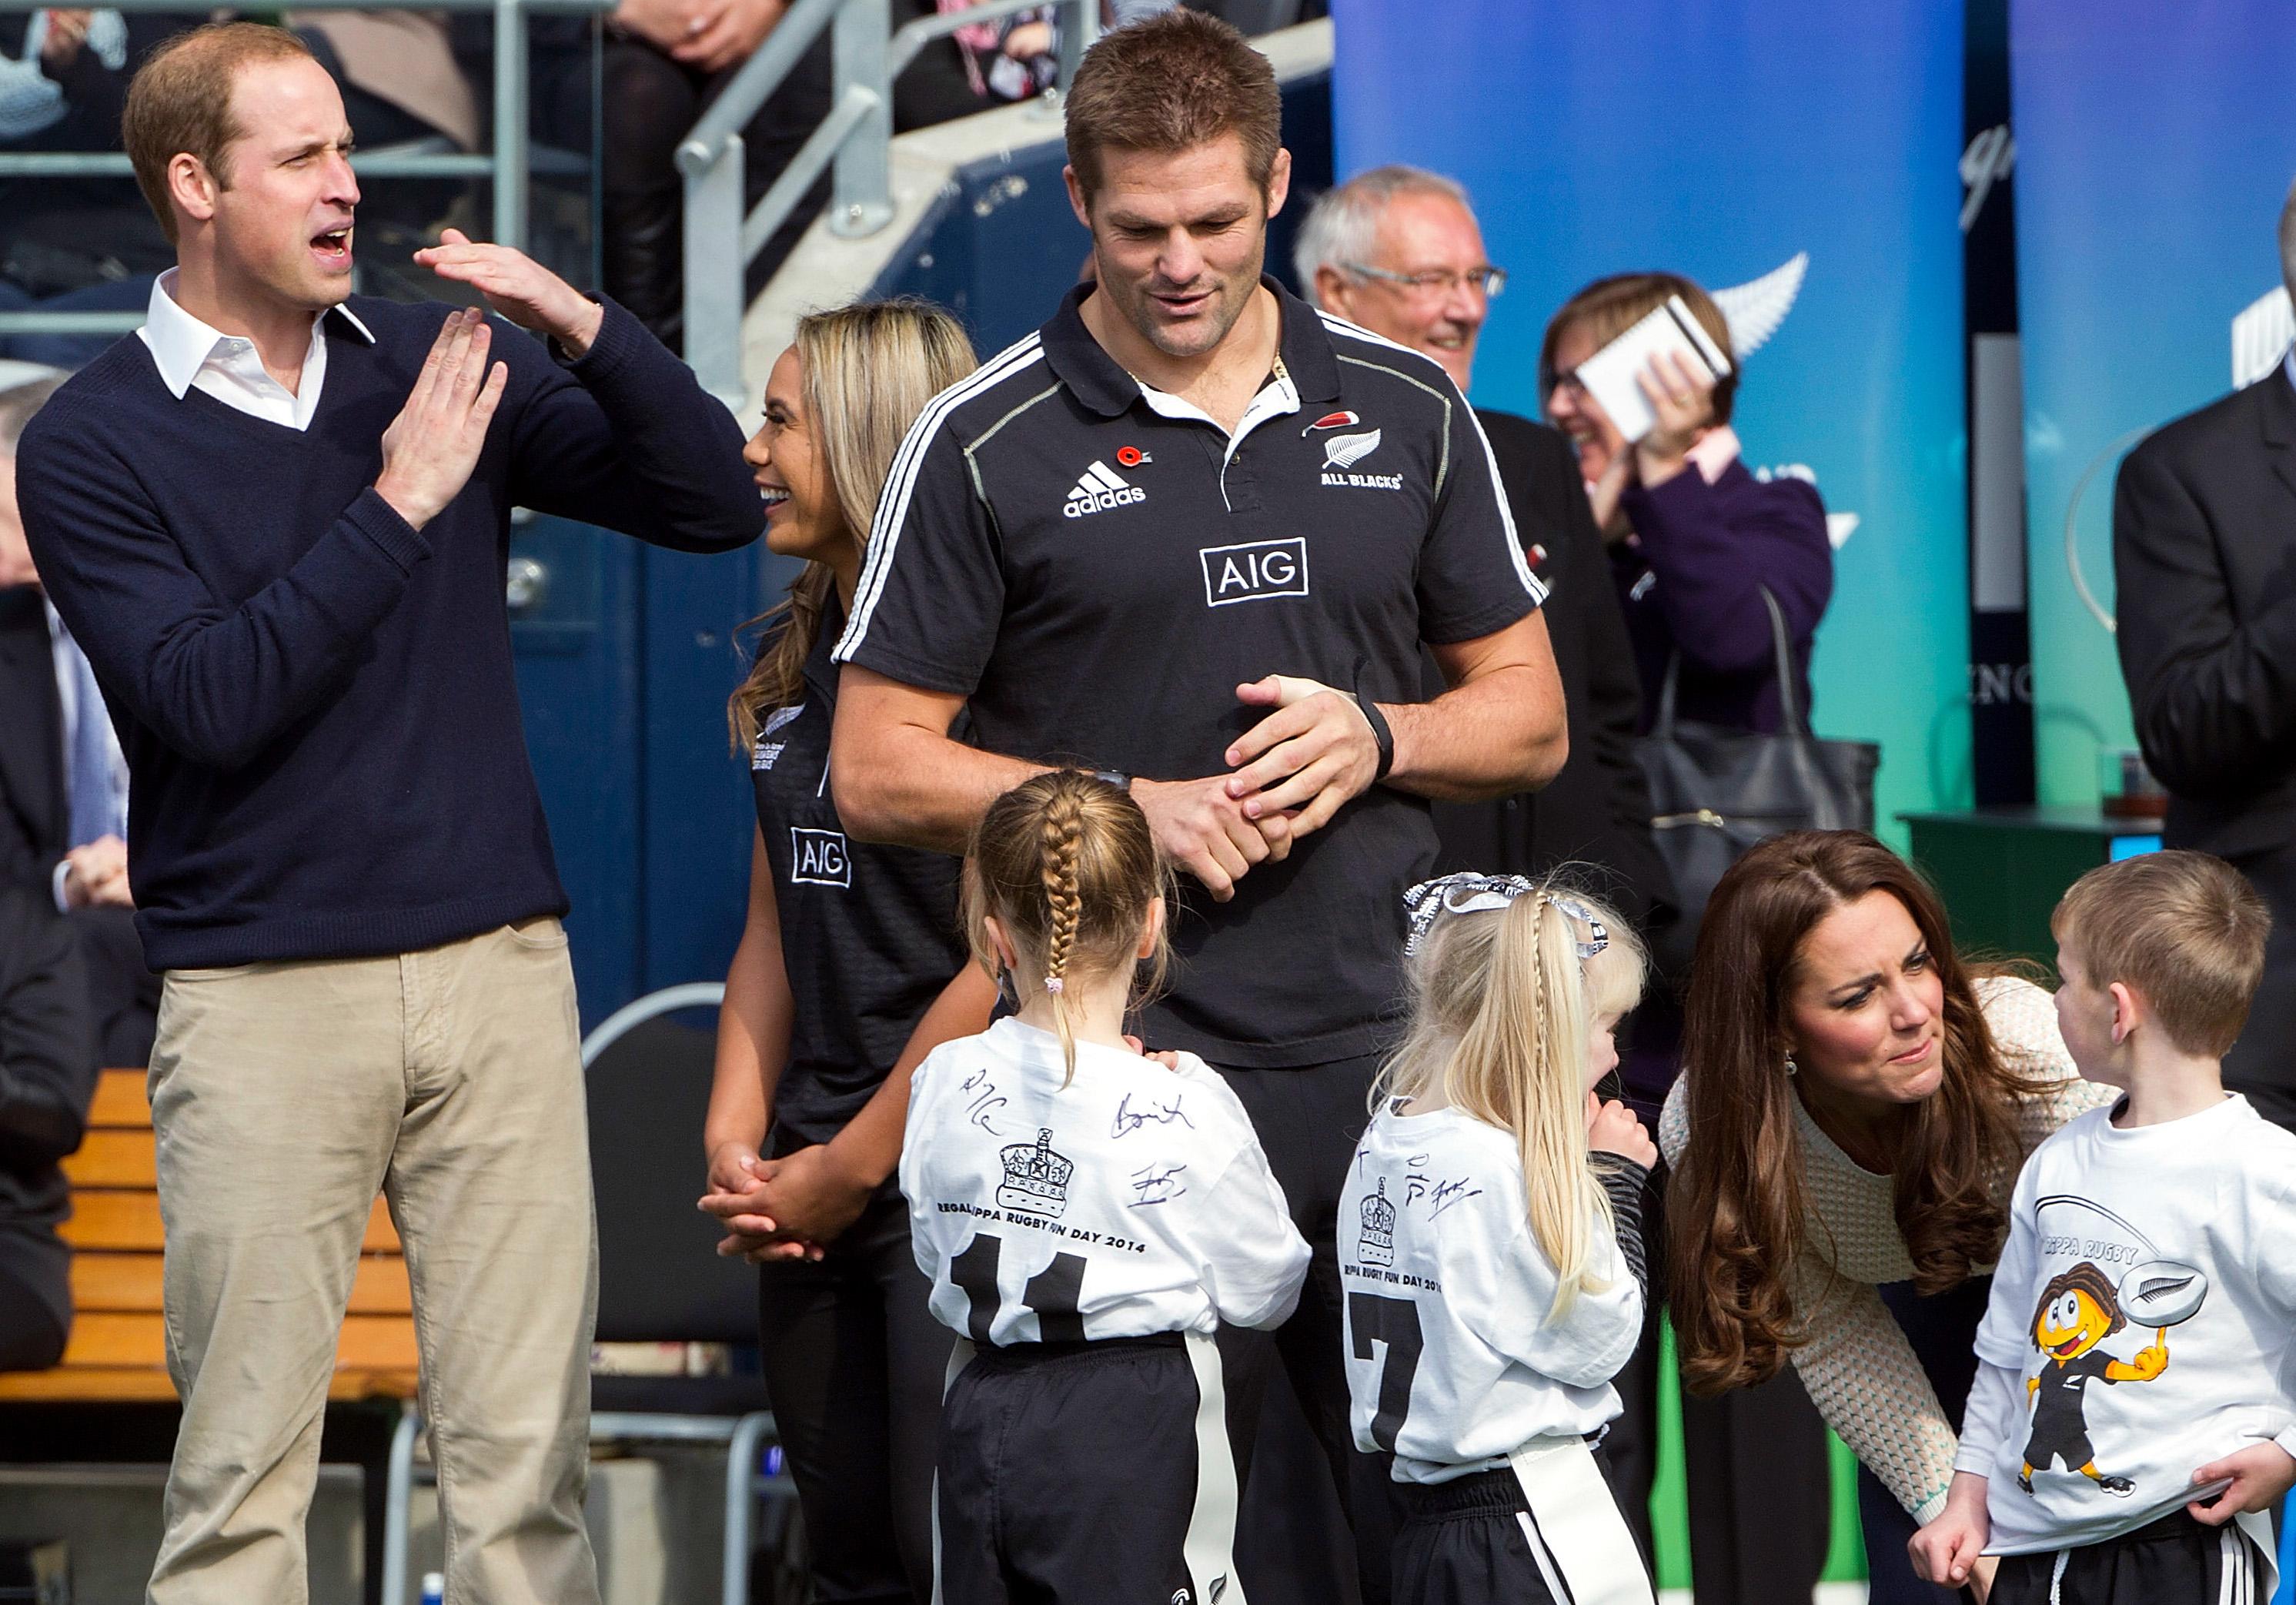 While recovering from injury, All Blacks skipper Richie McCaw joined Britain's Prince William and Catherine, the Duchess of Cambridge, at a young players' tournament in Dunedin. Photo: Reuters